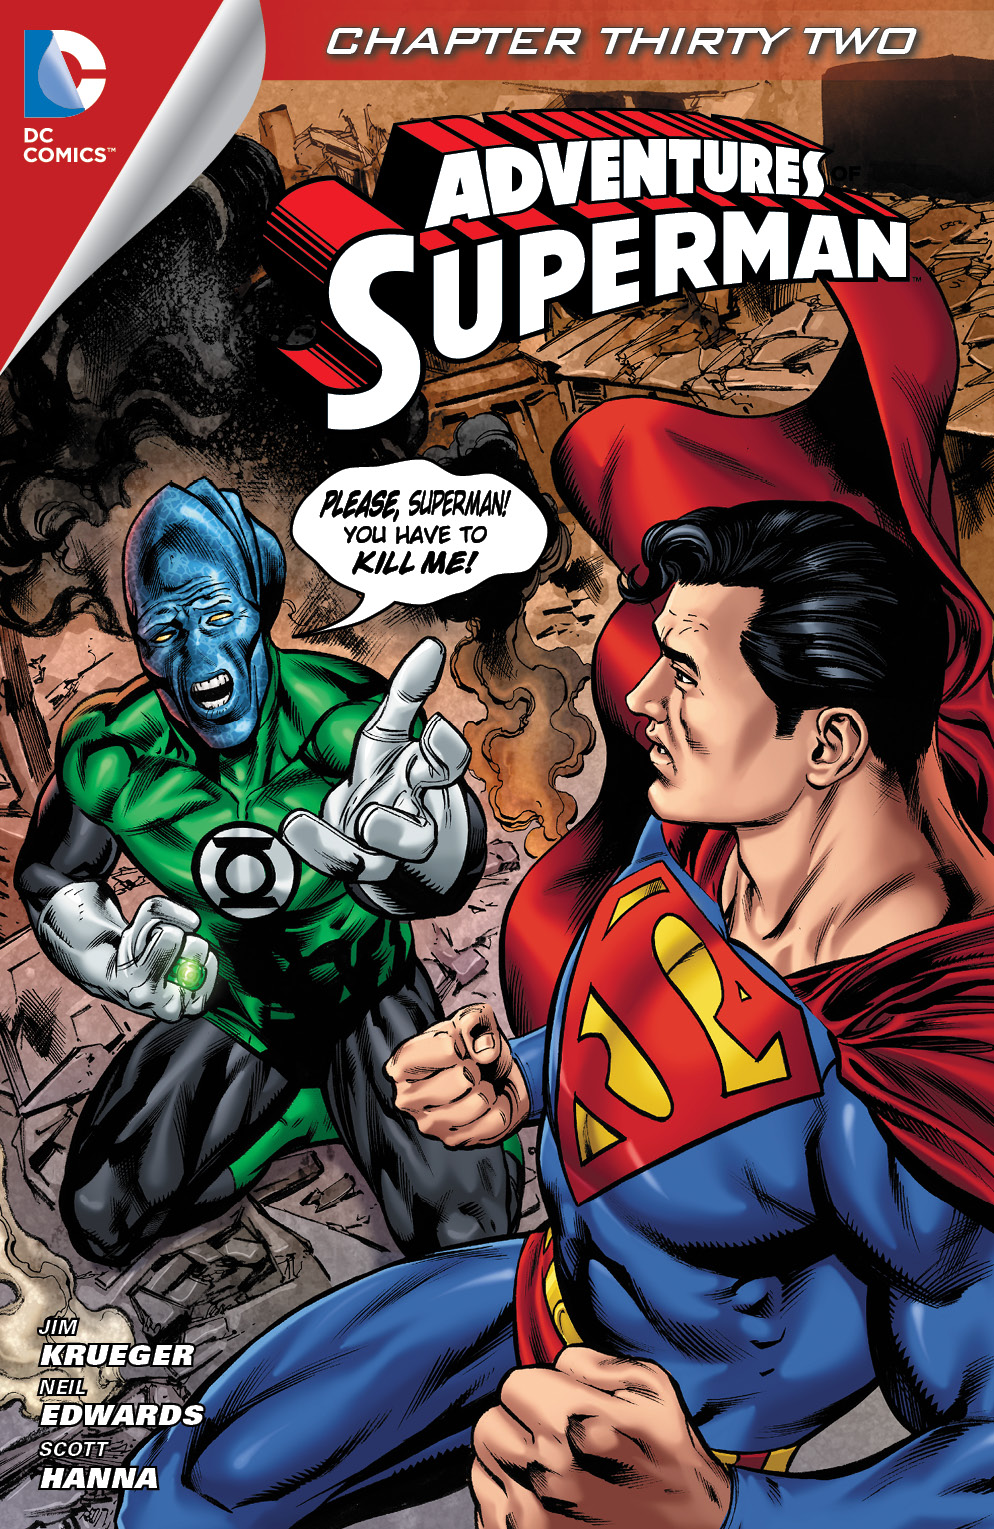 Adventures of Superman (2013-) #32 preview images